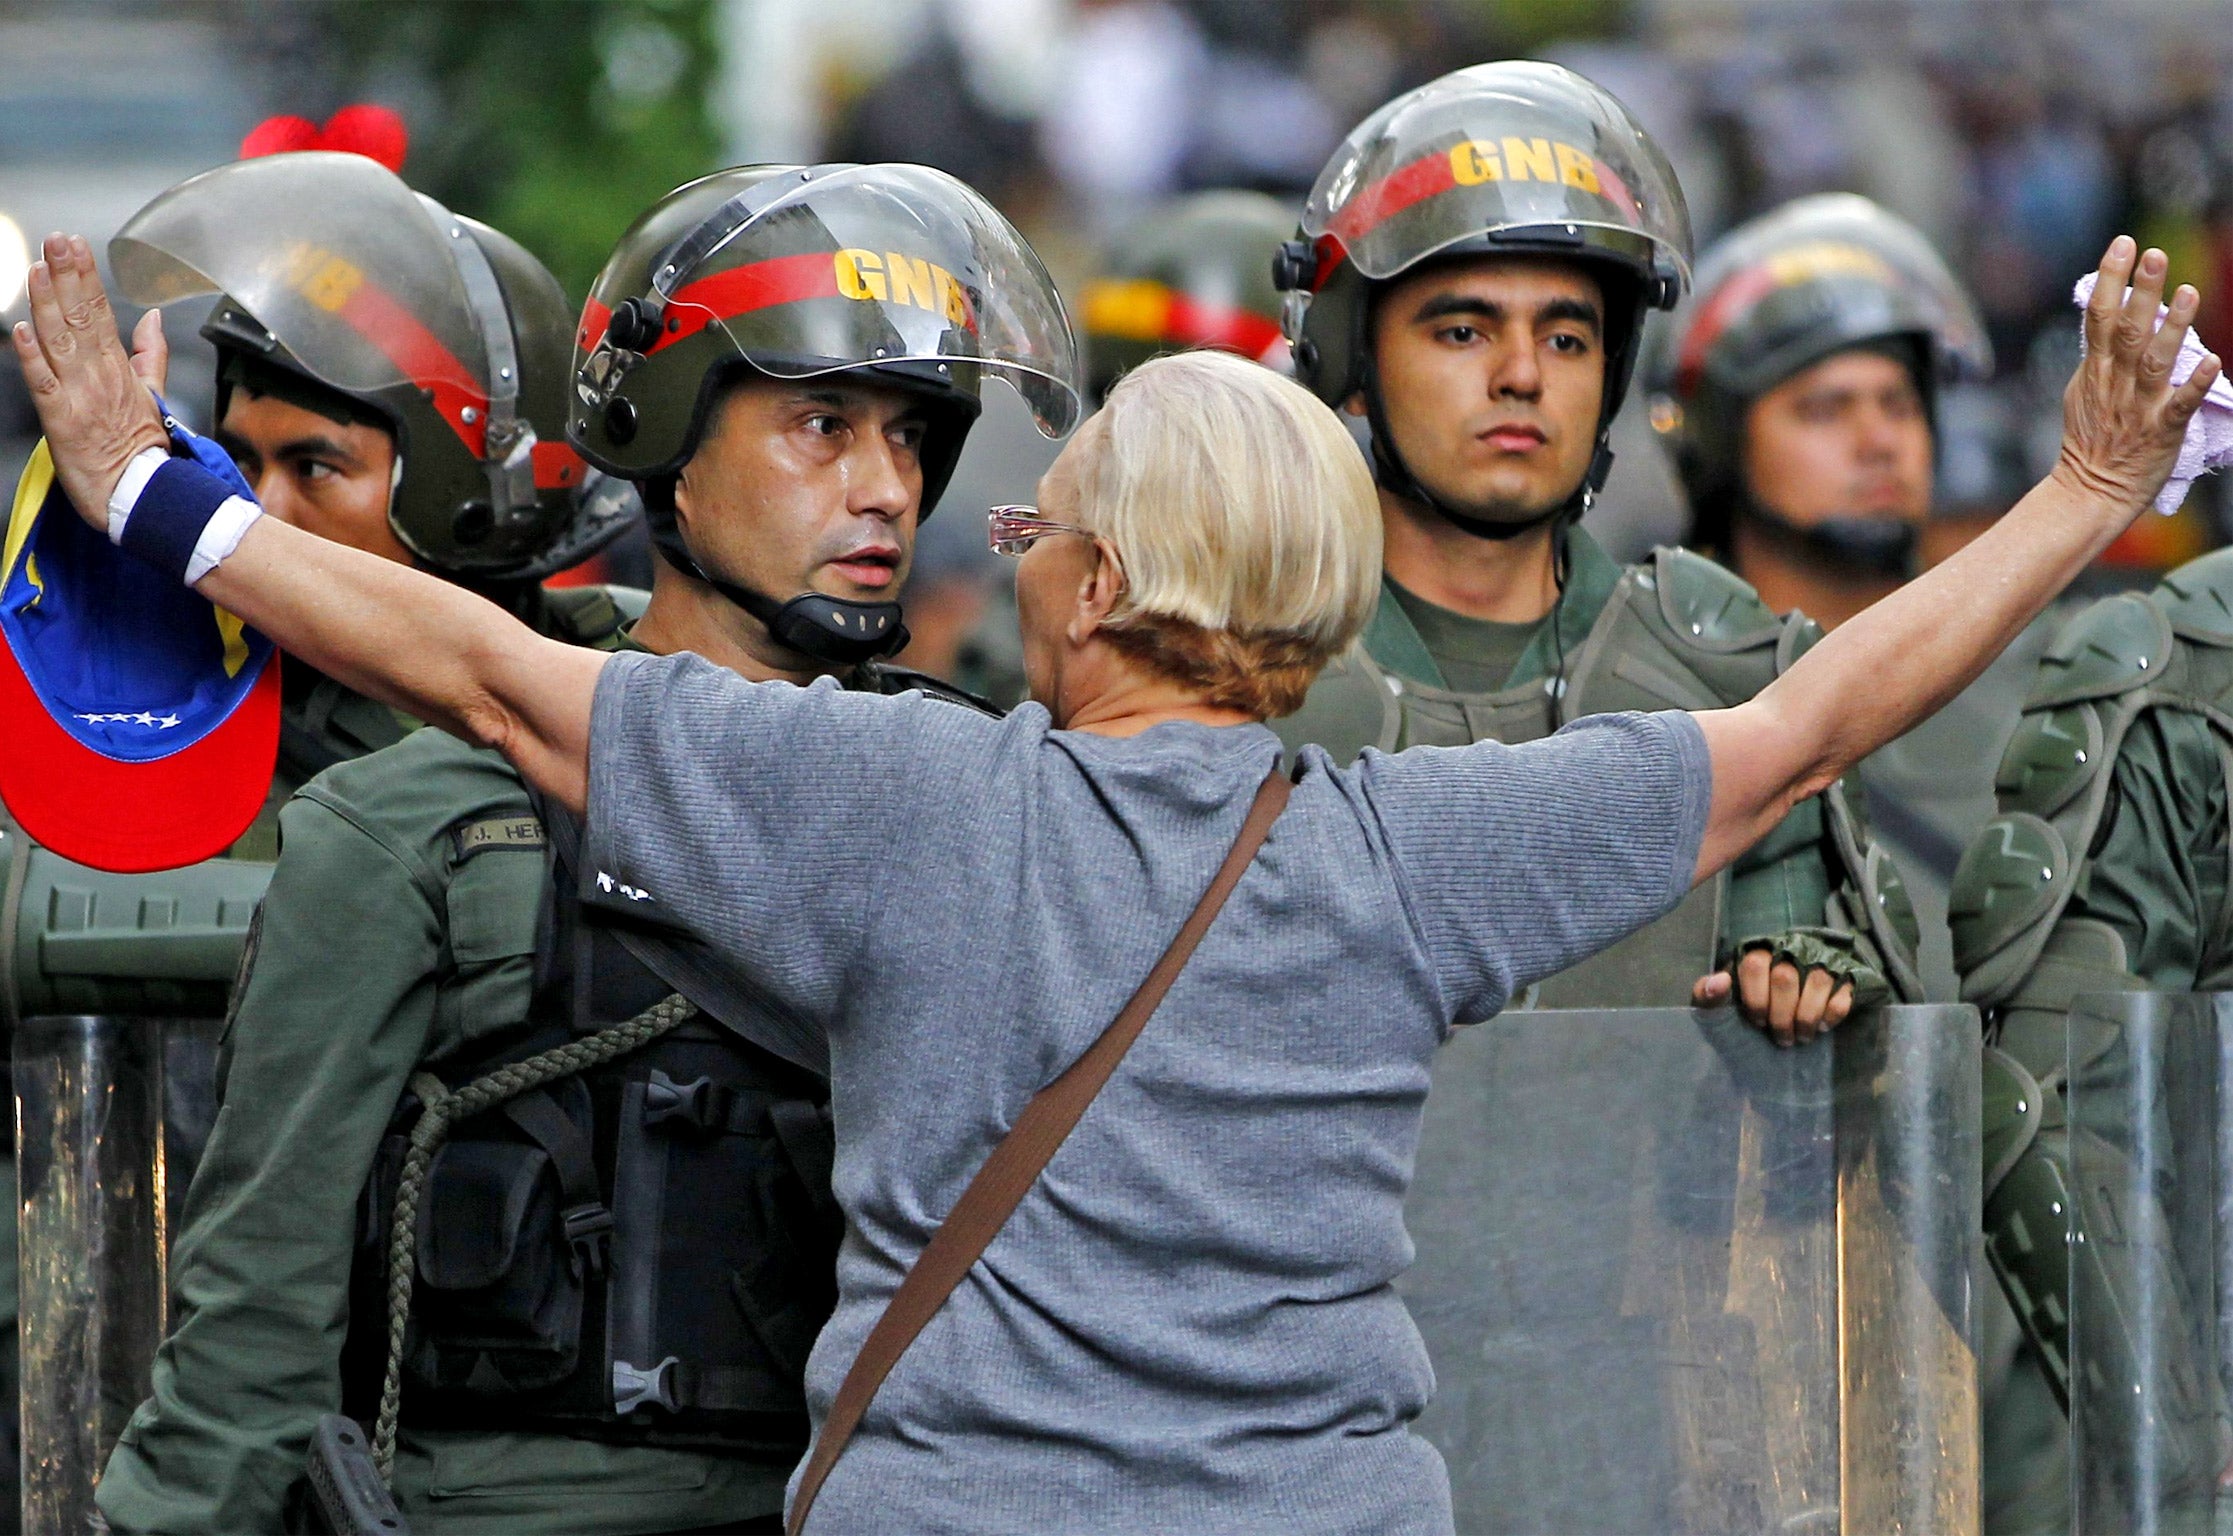 An opposition supporter shouts at a riot police officer during a protest against President Nicolas Maduro's government in Caracas